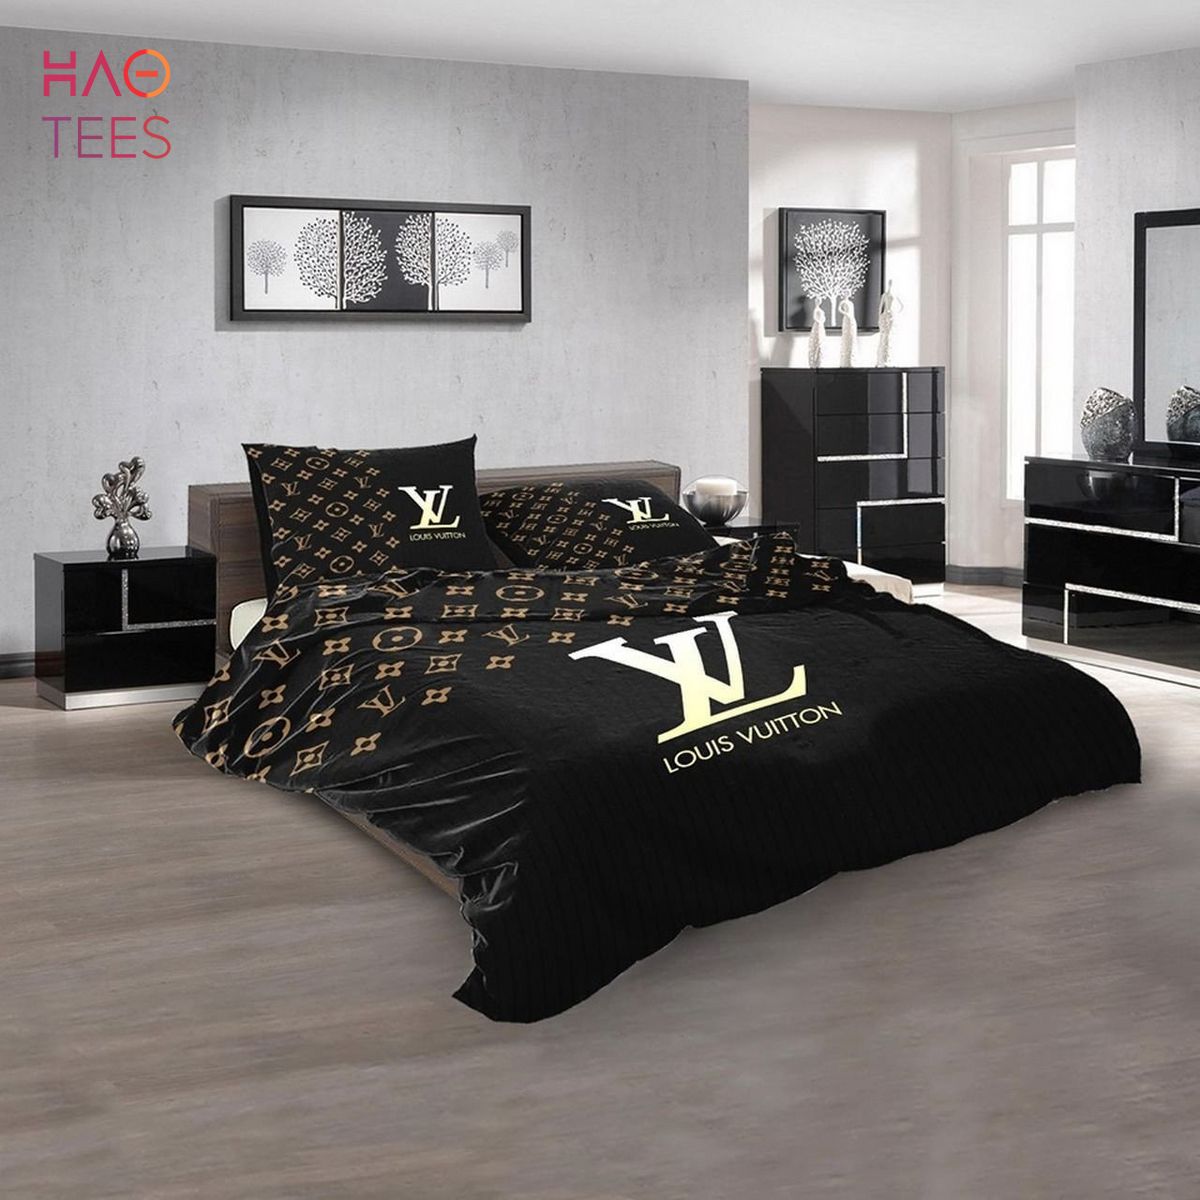 AVAILABLE] LV Mix Black Luxury Color Bedding Sets Limited Edition